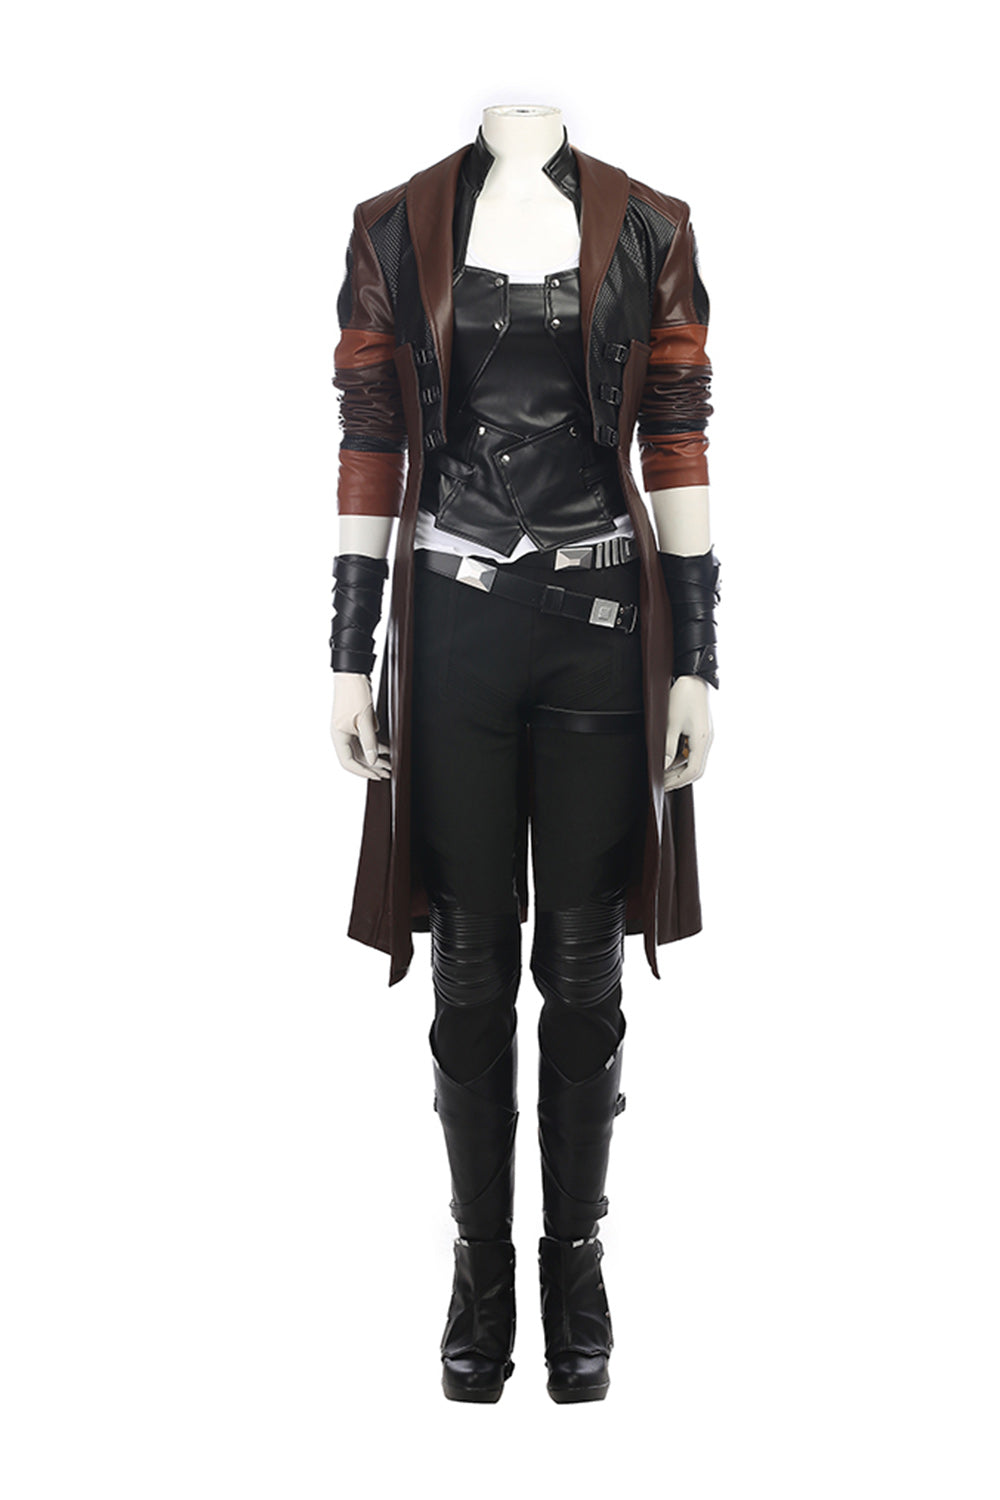 Guardians of the Galaxy 2 Gamora Cosplay Costume Avec Bottes